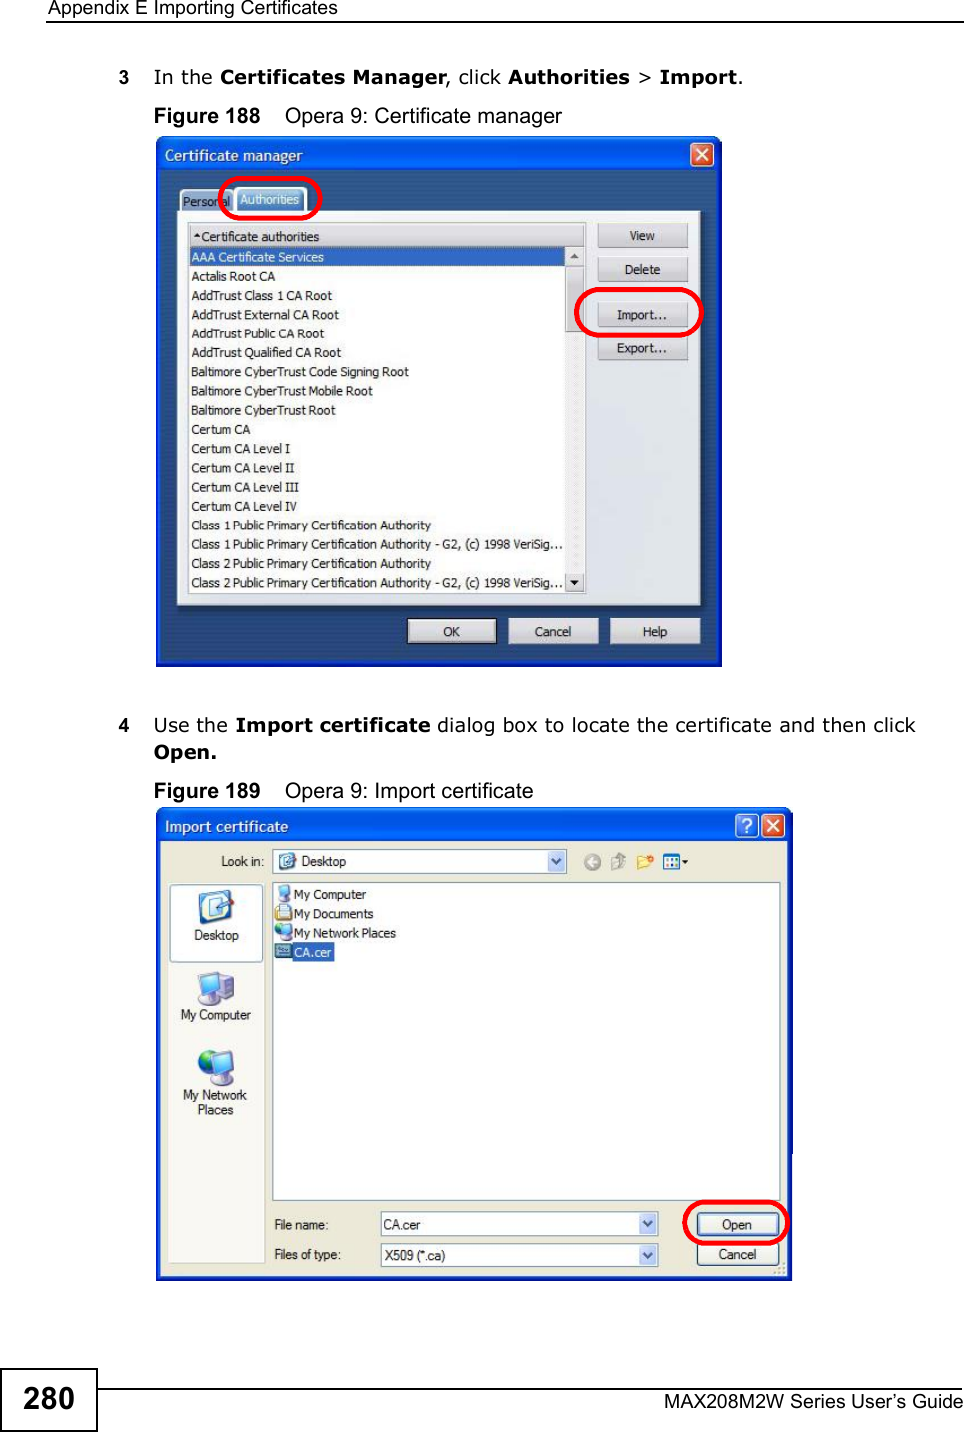 Appendix EImporting CertificatesMAX208M2W Series User s Guide2803In the Certificates Manager, click Authorities &gt; Import.Figure 188    Opera 9: Certificate manager4Use the Import certificate dialog box to locate the certificate and then click Open.Figure 189    Opera 9: Import certificate